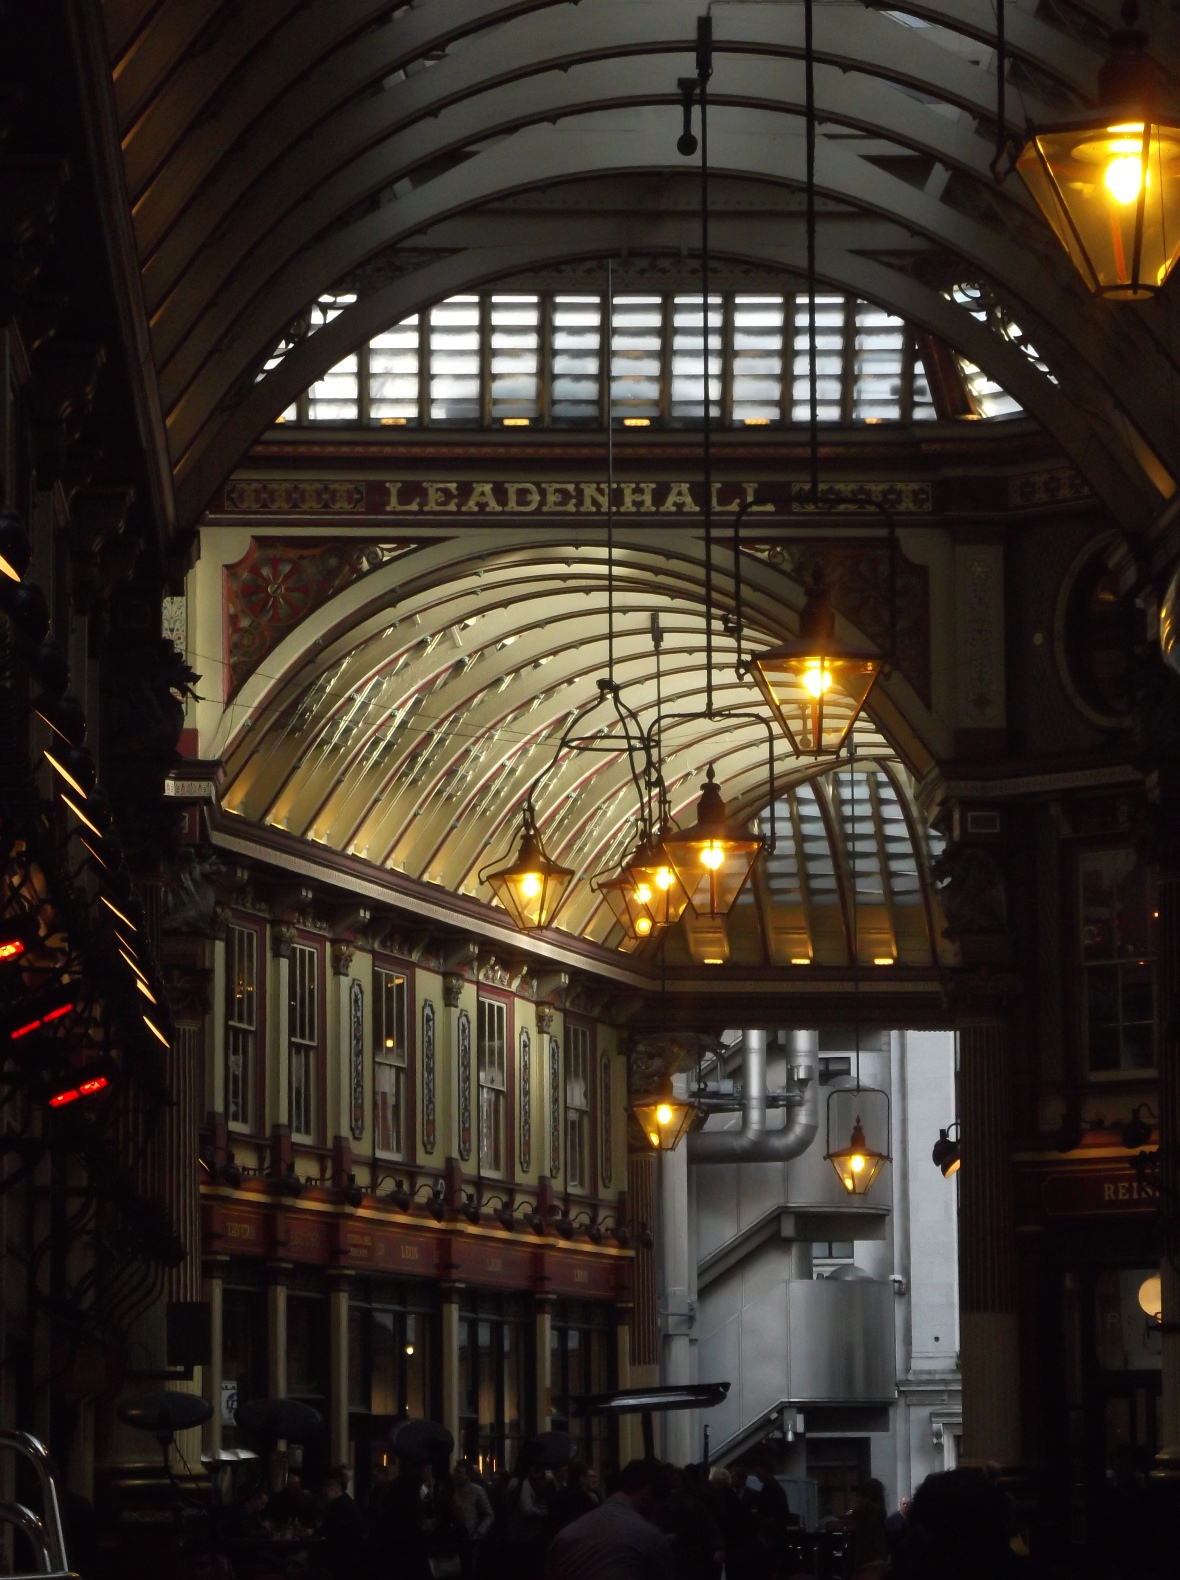 The Victorian shopping experience at Leadenhall Market